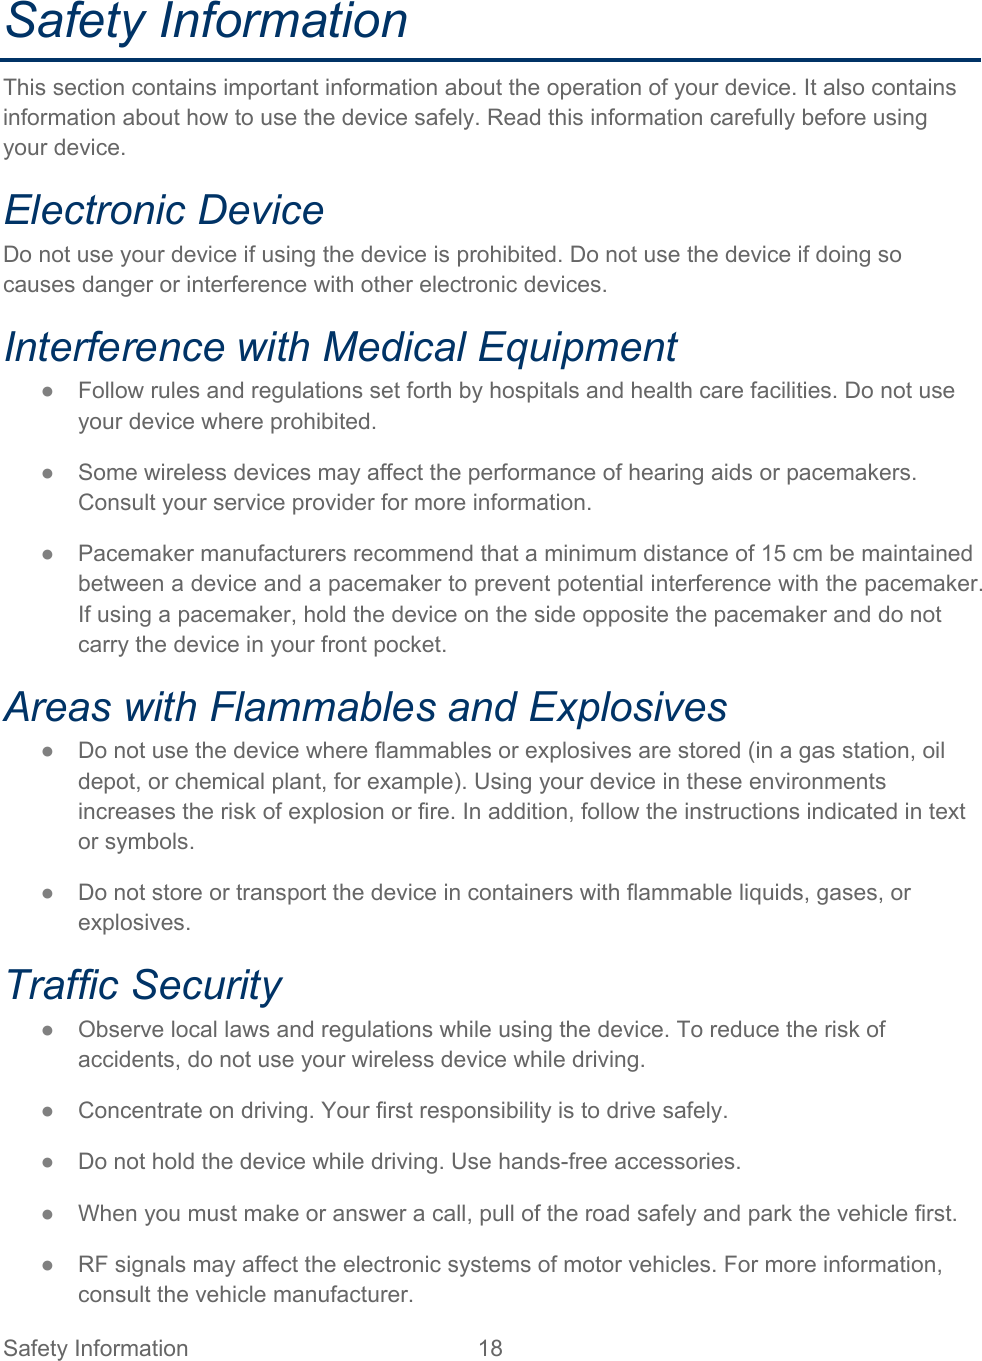 Safety Information 18   Safety Information This section contains important information about the operation of your device. It also contains information about how to use the device safely. Read this information carefully before using your device. Electronic Device Do not use your device if using the device is prohibited. Do not use the device if doing so causes danger or interference with other electronic devices. Interference with Medical Equipment ● Follow rules and regulations set forth by hospitals and health care facilities. Do not use your device where prohibited. ● Some wireless devices may affect the performance of hearing aids or pacemakers. Consult your service provider for more information. ● Pacemaker manufacturers recommend that a minimum distance of 15 cm be maintained between a device and a pacemaker to prevent potential interference with the pacemaker. If using a pacemaker, hold the device on the side opposite the pacemaker and do not carry the device in your front pocket. Areas with Flammables and Explosives ● Do not use the device where flammables or explosives are stored (in a gas station, oil depot, or chemical plant, for example). Using your device in these environments increases the risk of explosion or fire. In addition, follow the instructions indicated in text or symbols. ● Do not store or transport the device in containers with flammable liquids, gases, or explosives. Traffic Security ● Observe local laws and regulations while using the device. To reduce the risk of accidents, do not use your wireless device while driving. ● Concentrate on driving. Your first responsibility is to drive safely. ● Do not hold the device while driving. Use hands-free accessories. ● When you must make or answer a call, pull of the road safely and park the vehicle first.  ● RF signals may affect the electronic systems of motor vehicles. For more information, consult the vehicle manufacturer. 